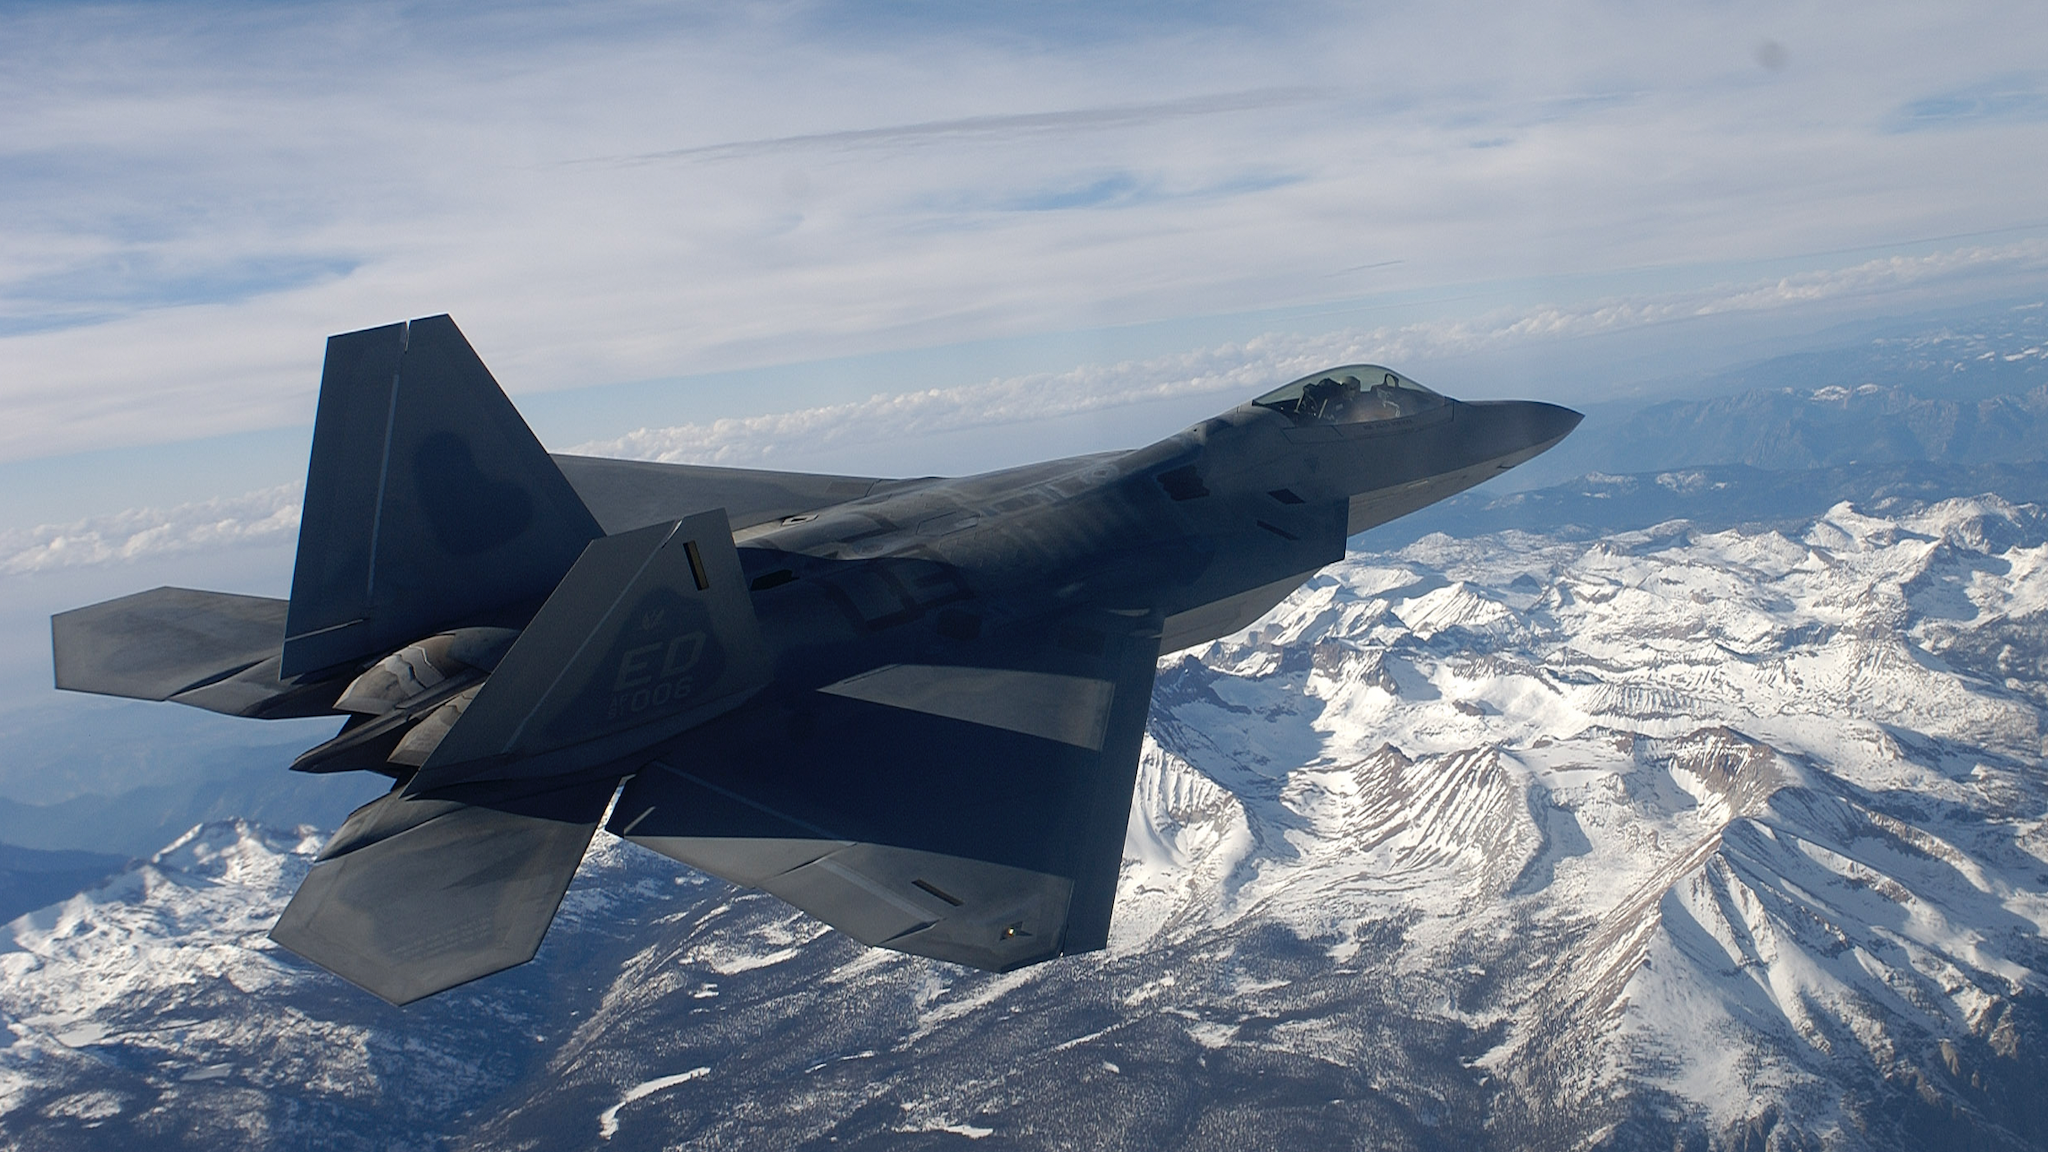 IN FLIGHT - NOVEMBER 23: The United States Air Force's F/A-22 Raptor, which will replace the F-15 bomber and is the first supersonic stealth fighter plane ever created flys over the Sierra Nevada Mountains November 23, 2002 in Northern California. The Raptor is said to be the most advanced plane ever designed and will be fully operational by 2005. Onboard is the new generation of smart computers that have made its advances possible. Whereas, for example, the Saturn V Rocket of 1967 had a computer onboard that ran on sixteen thousand lines of code, the Raptor's computer is programmed with two million lines of code. Because it stores it missiles and fuel inside its body, moreover, it has exceptionally low aerodynamic drag. Add to this low drag the fact that it is virtually impossible to detect the Raptor by radar until it is too close to fire on, and it is safe to say that the Raptor gives the US doiminance in the skies. Each plane has over one million parts and it takes one thousand Lockheed Martin technicians one month to build one in their facilities in Marietta, Georgia. With the Wright Brothers' historic flight celebrating its centennial in 2003, the world is now poised on the threshold of a new age in aviation, one where super-sonic jets refuel in flight, unmanned aerial vehicles track objects with astonishing accuracy, and airliners are maneuvered at times with minimal human participation. The computer age is about to revolutionize aviation and the United States is unquestionably ahead of the curve in this revolution.